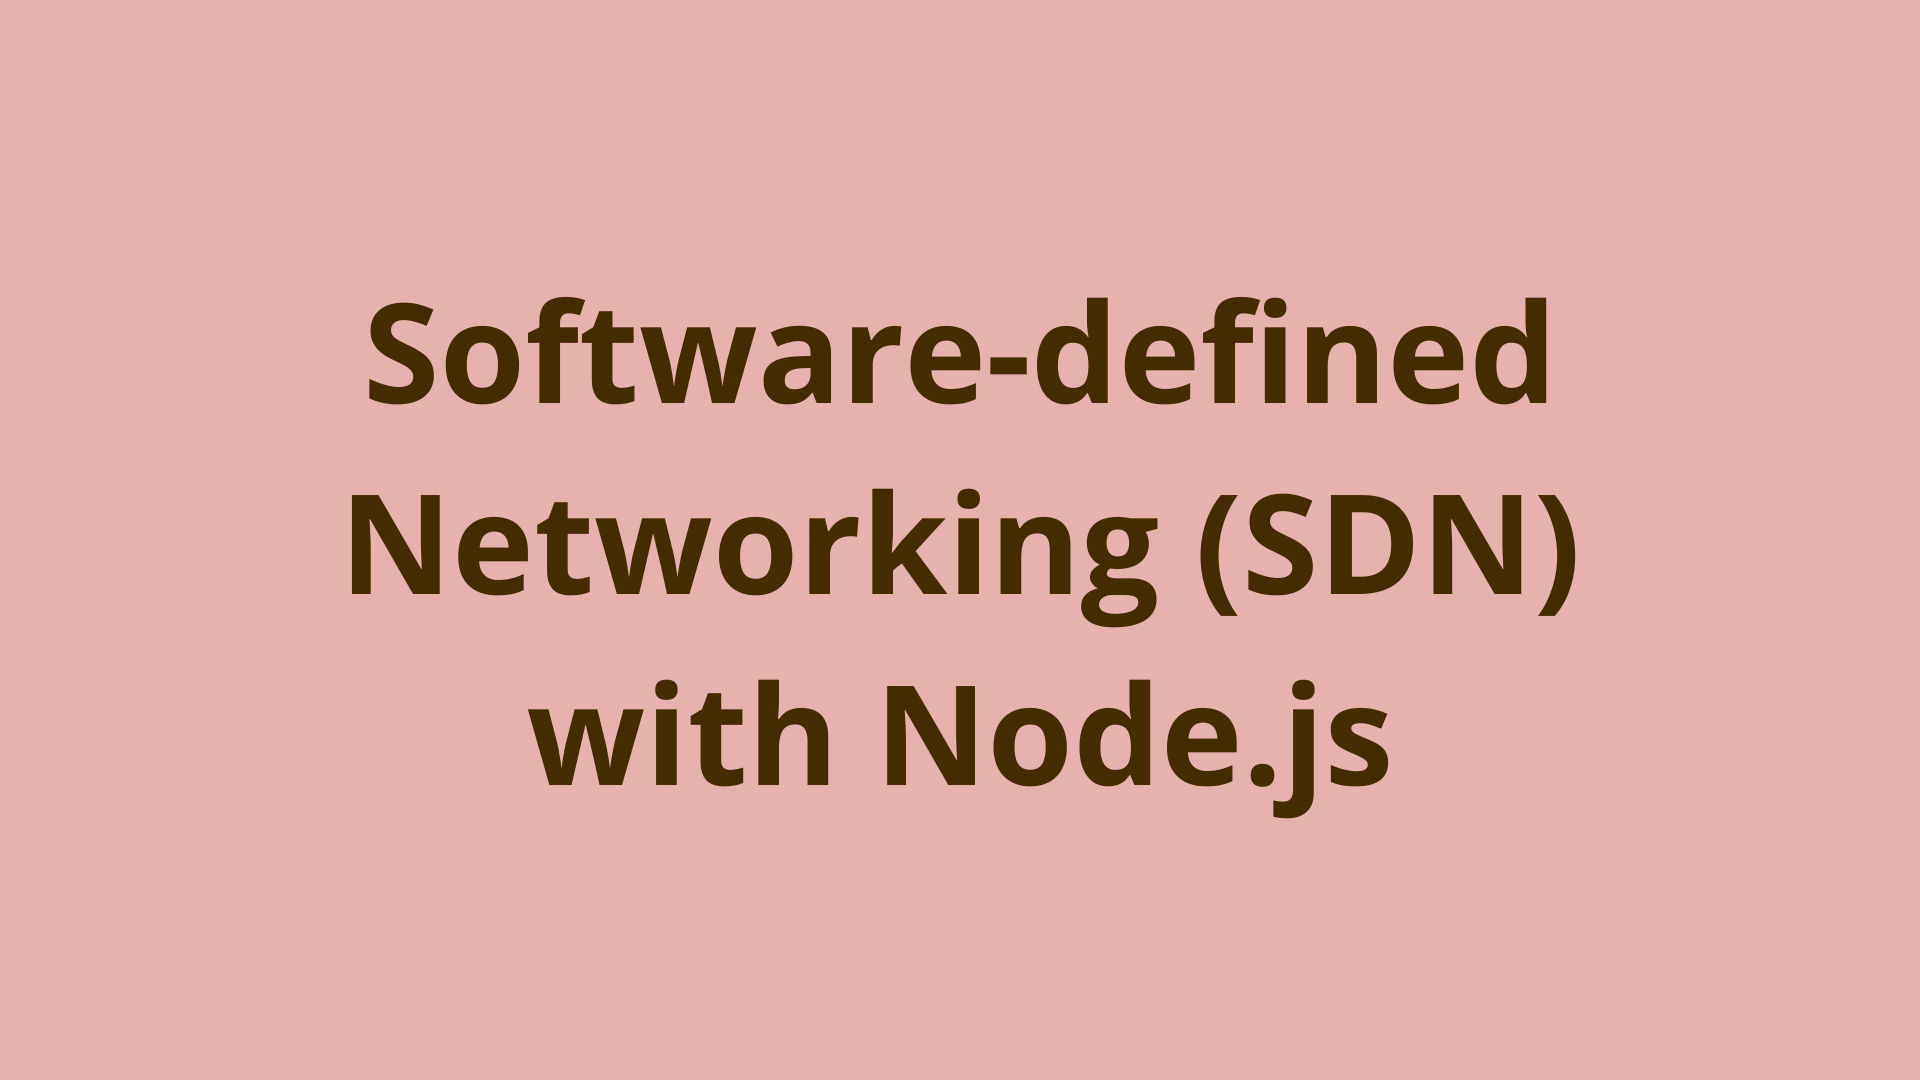 Image of Software-defined networking (SDN) with Node.js